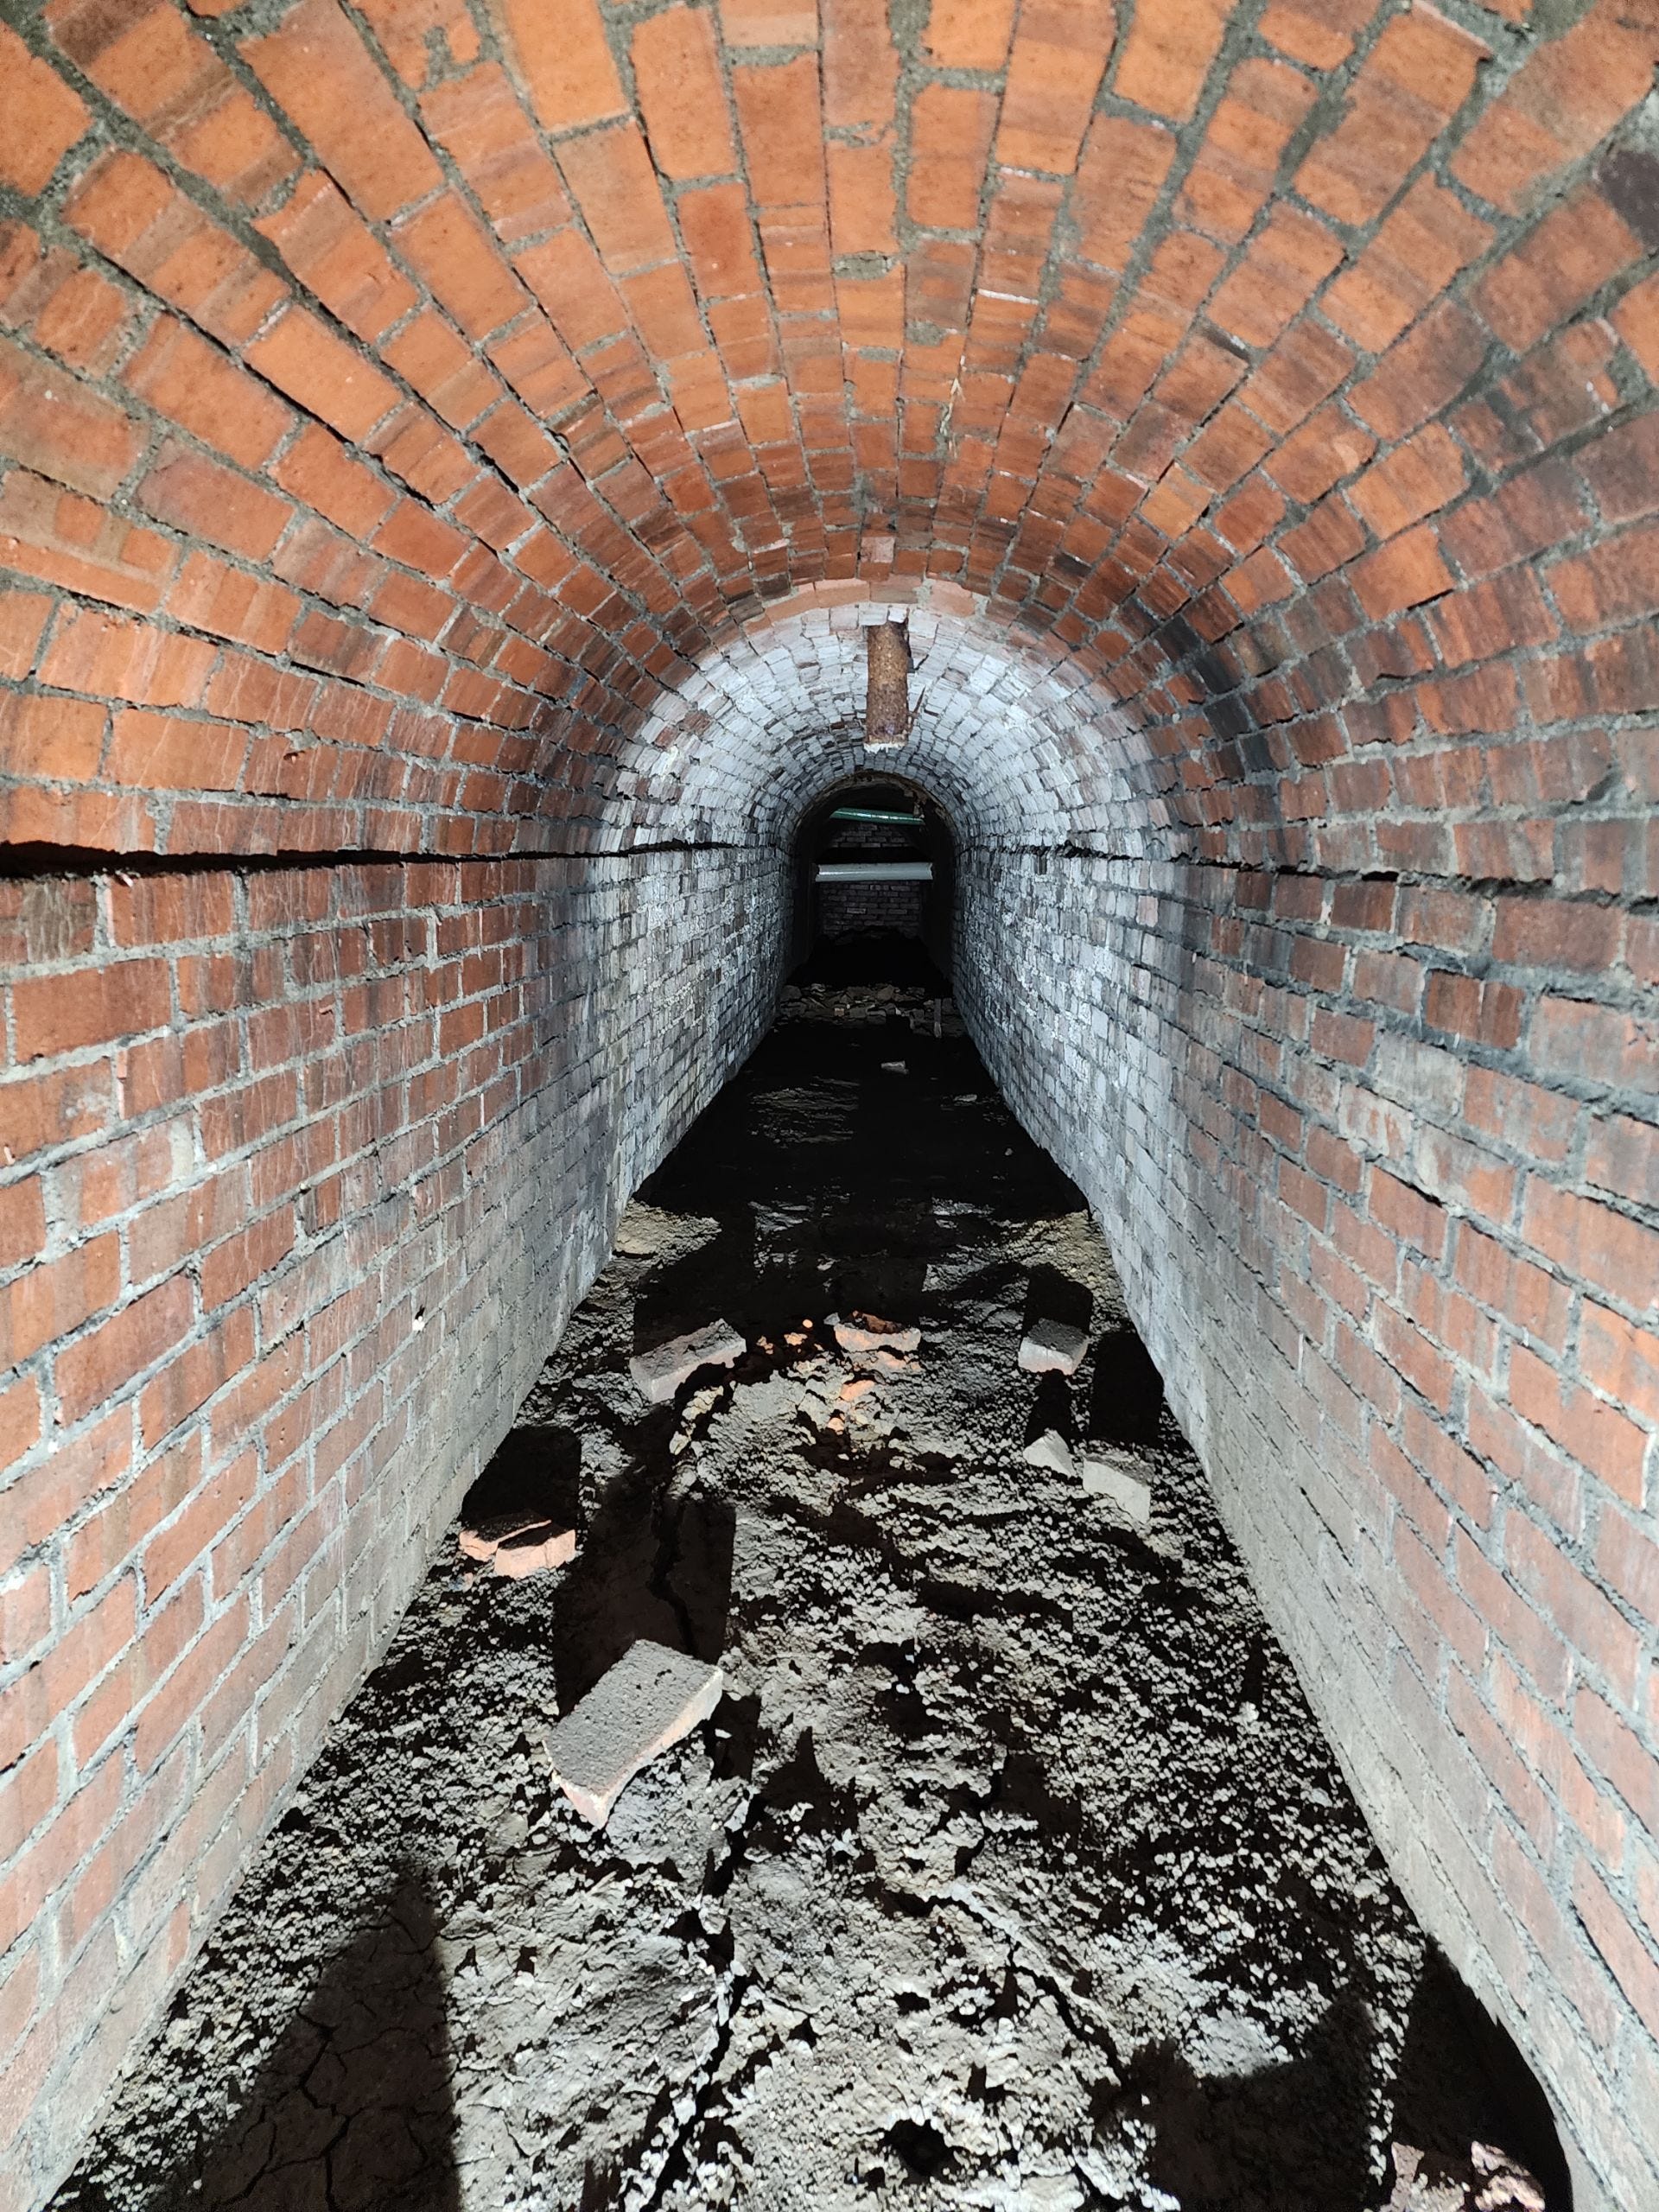 Hidden tunnel, possibly connected to the Underground Railroad, found in Pennsylvania